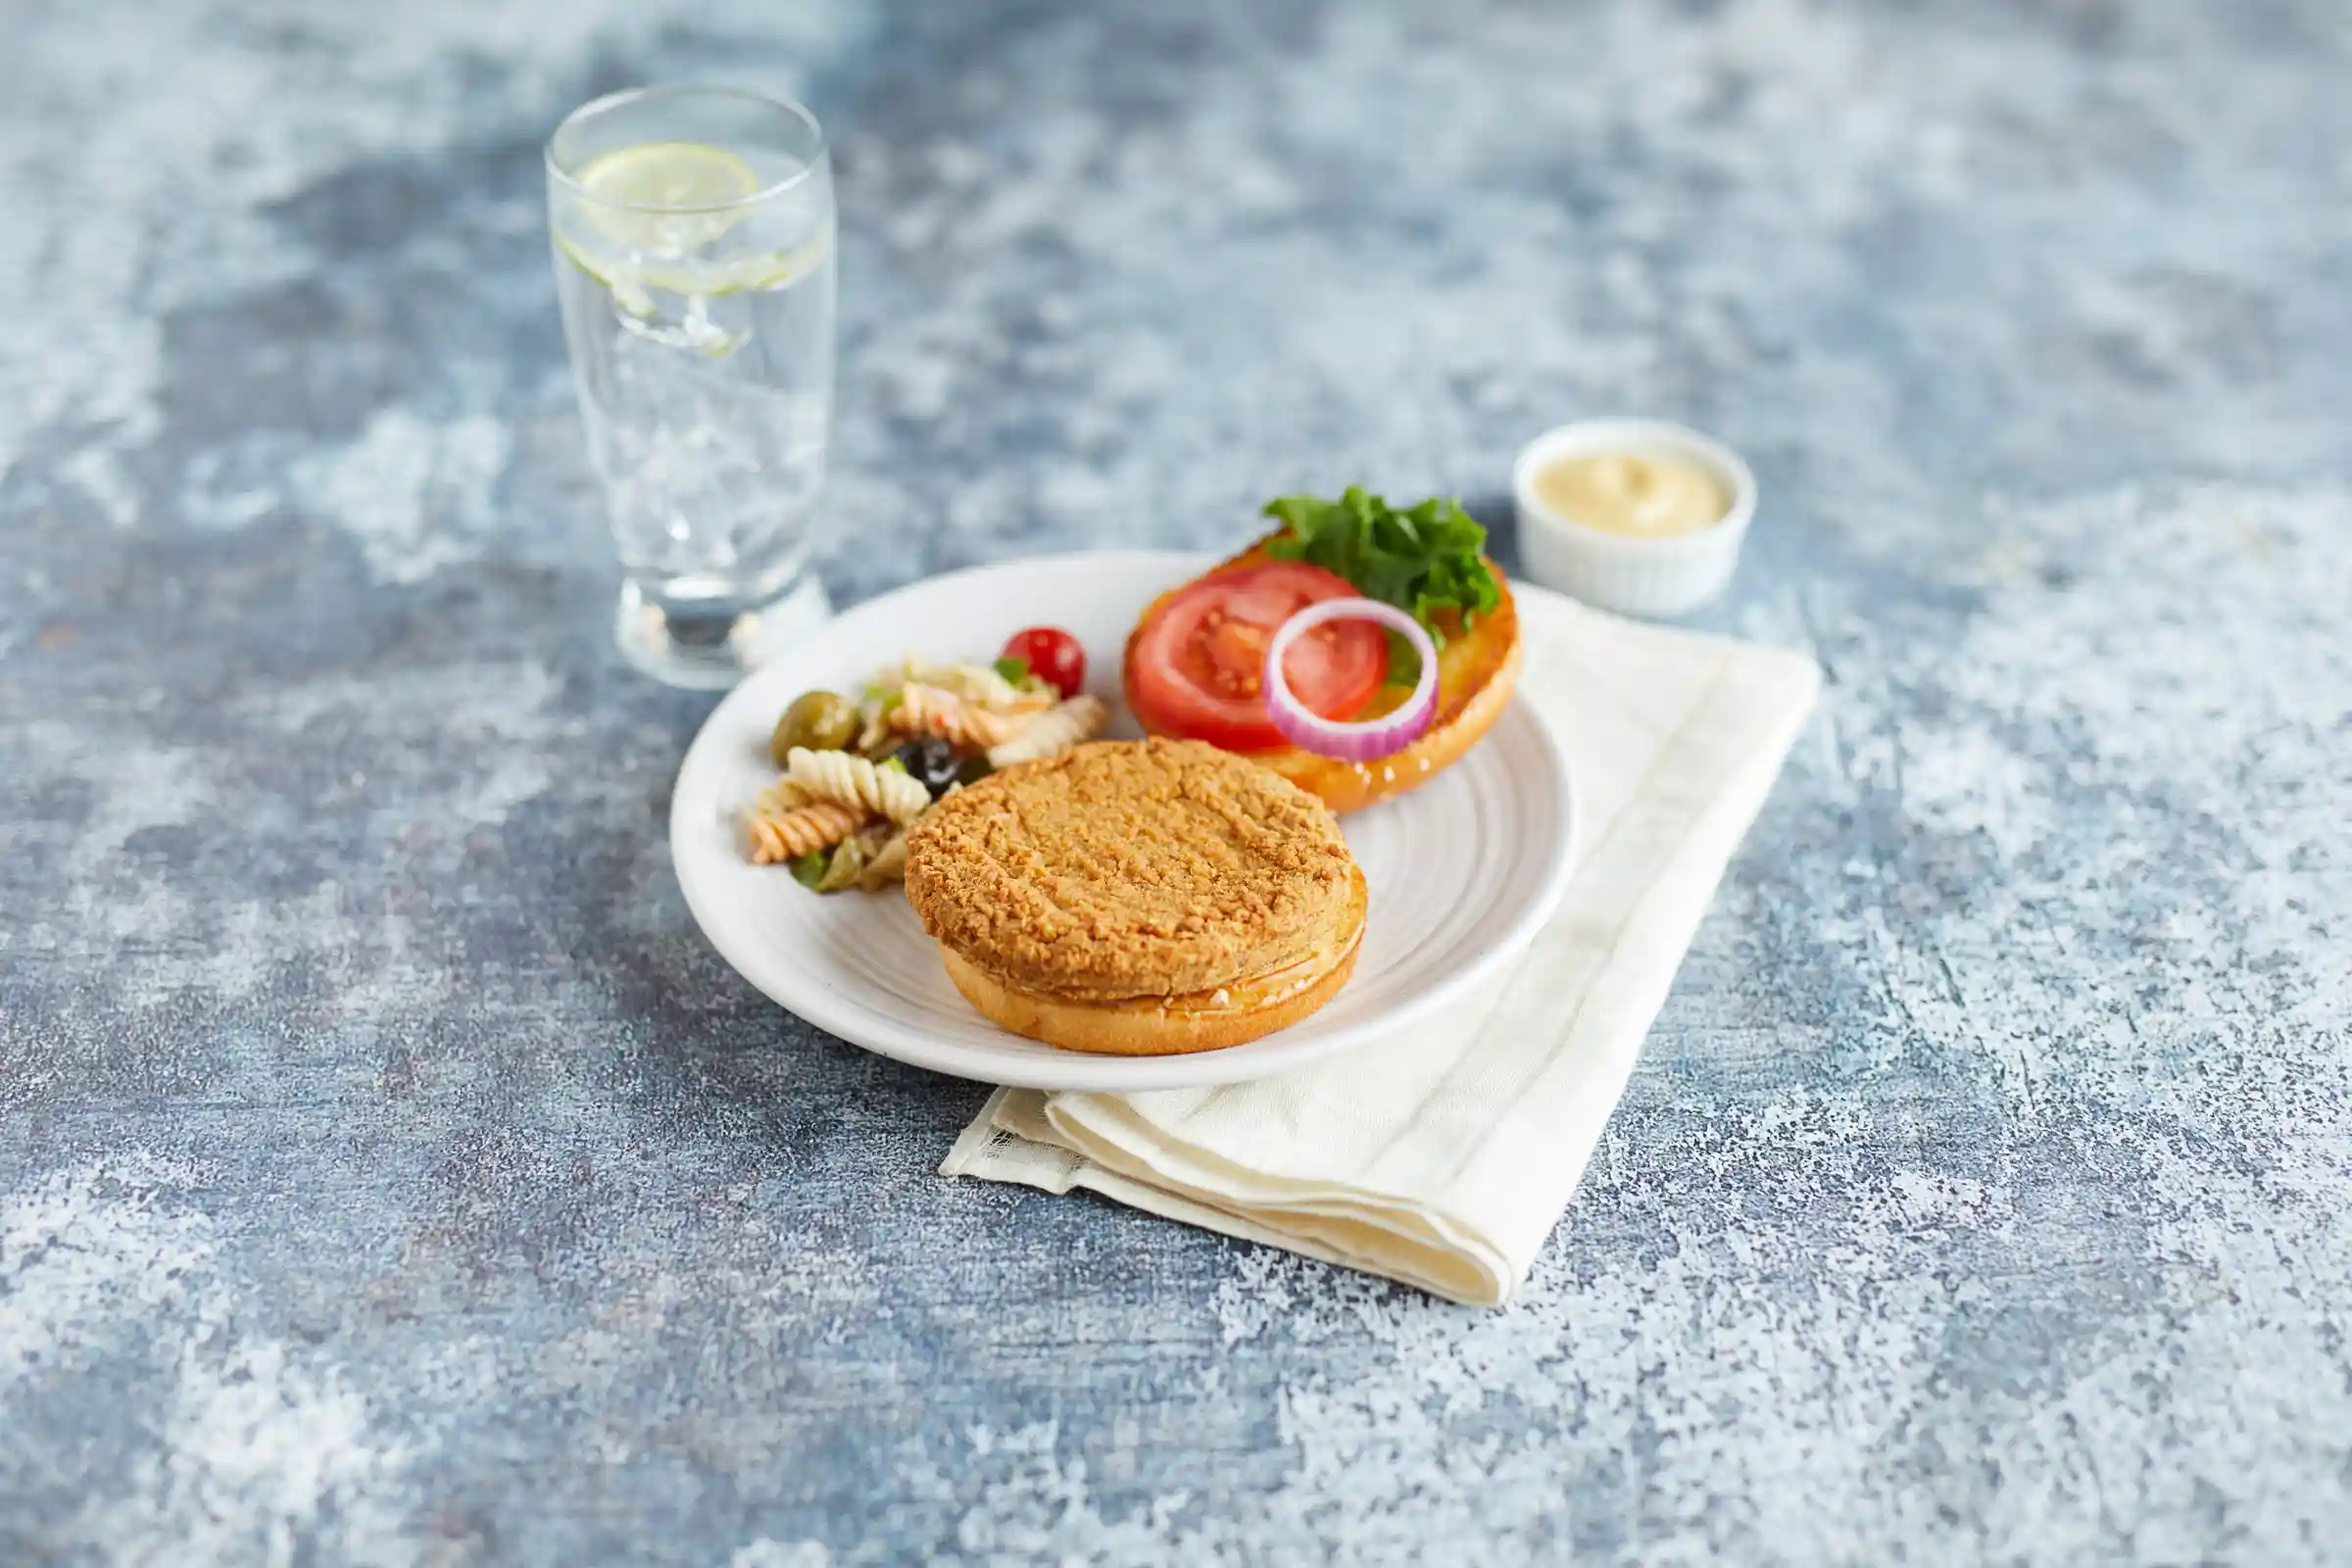 Tyson® Fully Cooked Whole Grain Breaded Chicken Breast Patties, CN, 3.63 oz. https://images.salsify.com/image/upload/s--0GG1npKh--/q_25/np46yzwfmuq6rnzrqfyq.webp